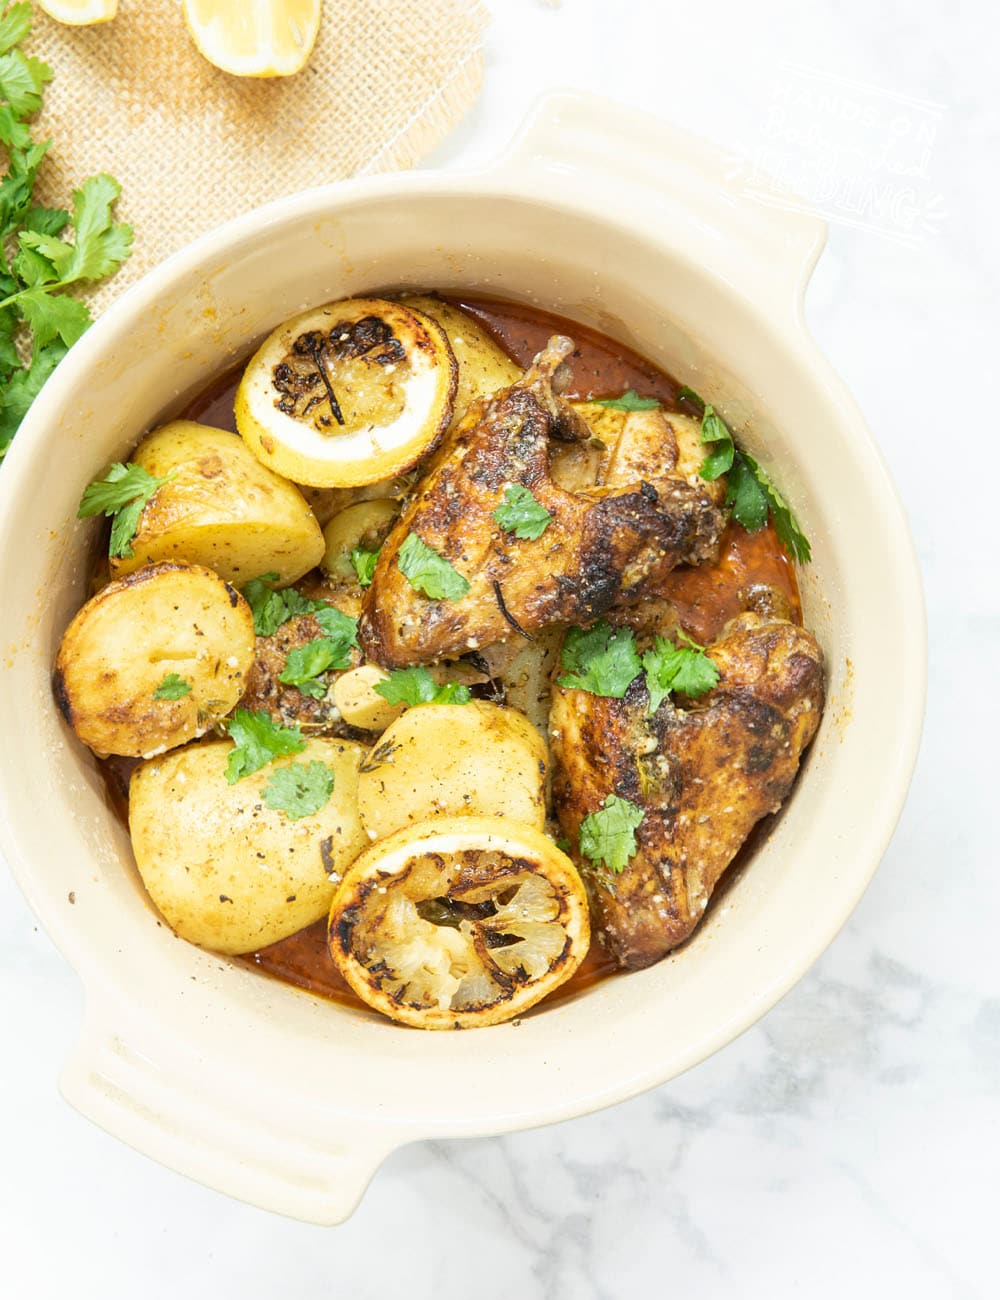 Baby Led Weaning Slow Cooker Chicken with Lemon & Garlic. Easy and healthy baby food for BLW crockpot recipe. Make ahead and feed the entire family! Dairy free and egg free. #babyledweaning #dairyfree #eggfree #slowcookerrecipe